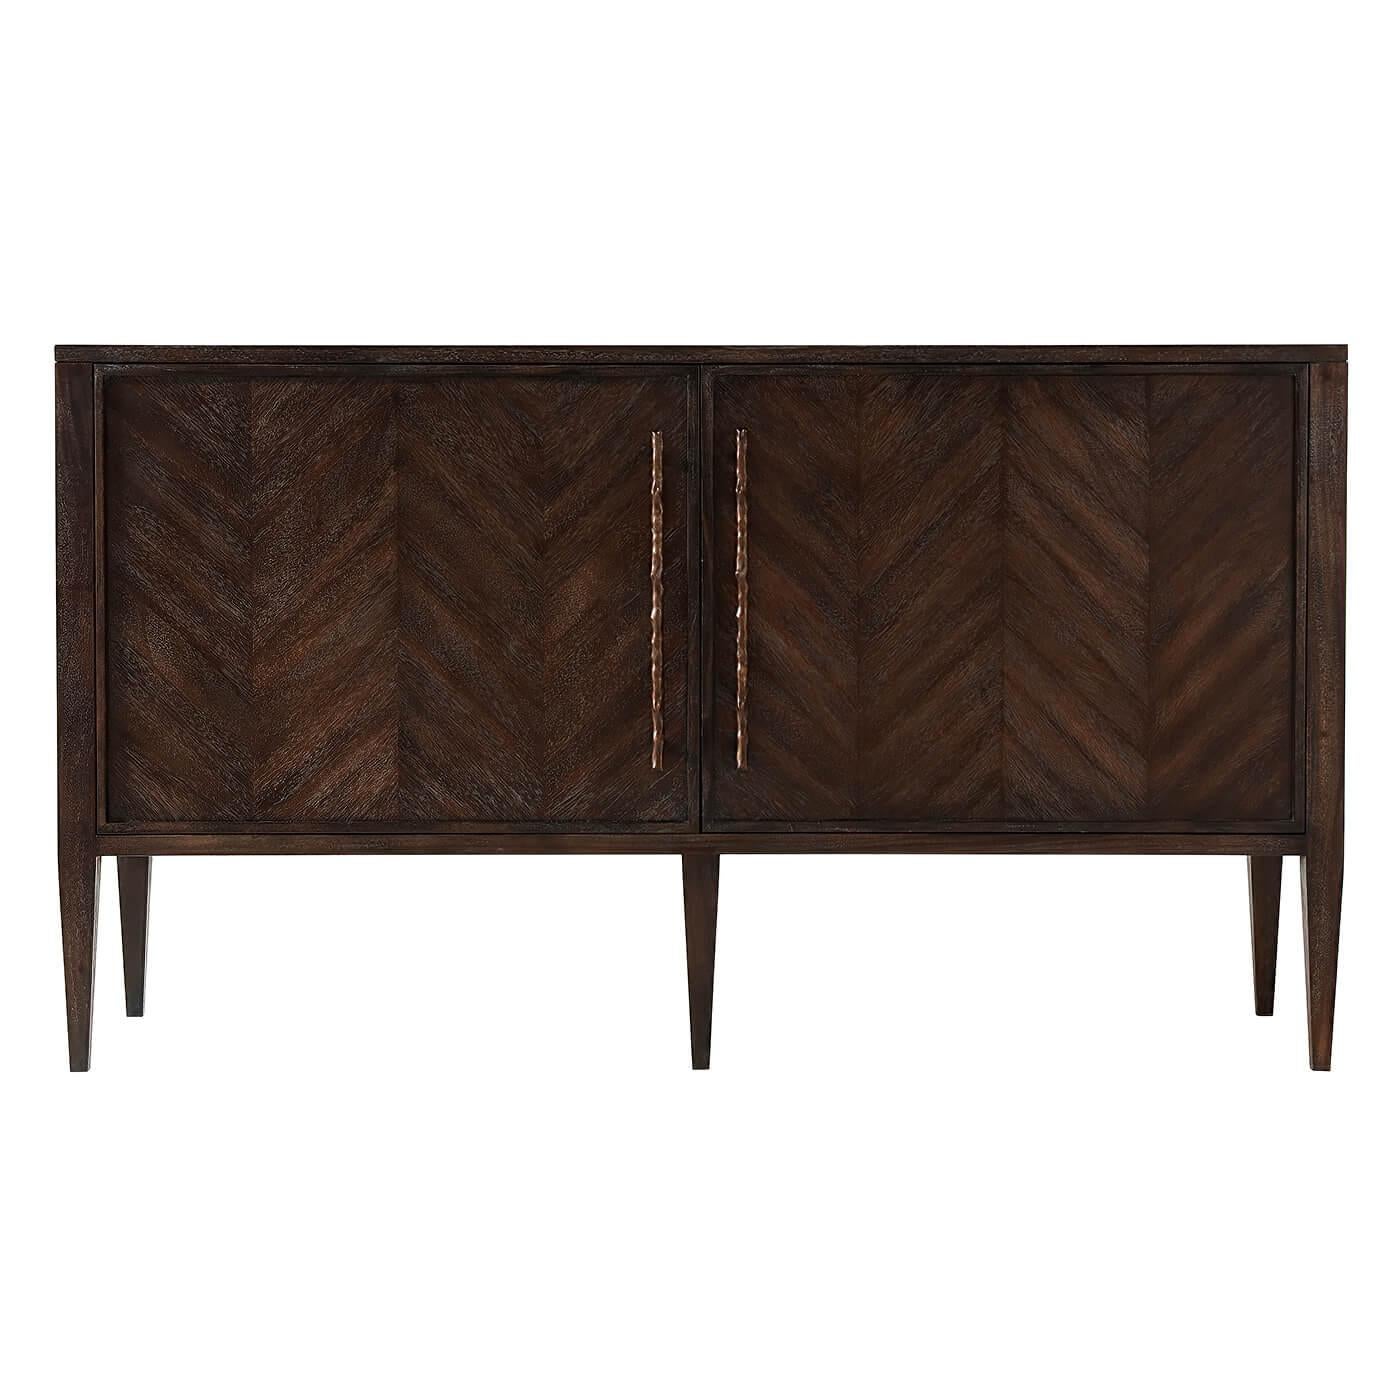 Modern mahogany herringbone parquetry panelled door cabinet with cast branch form handles, interior adjustable shelves and square tapered legs.
Dimensions: 60